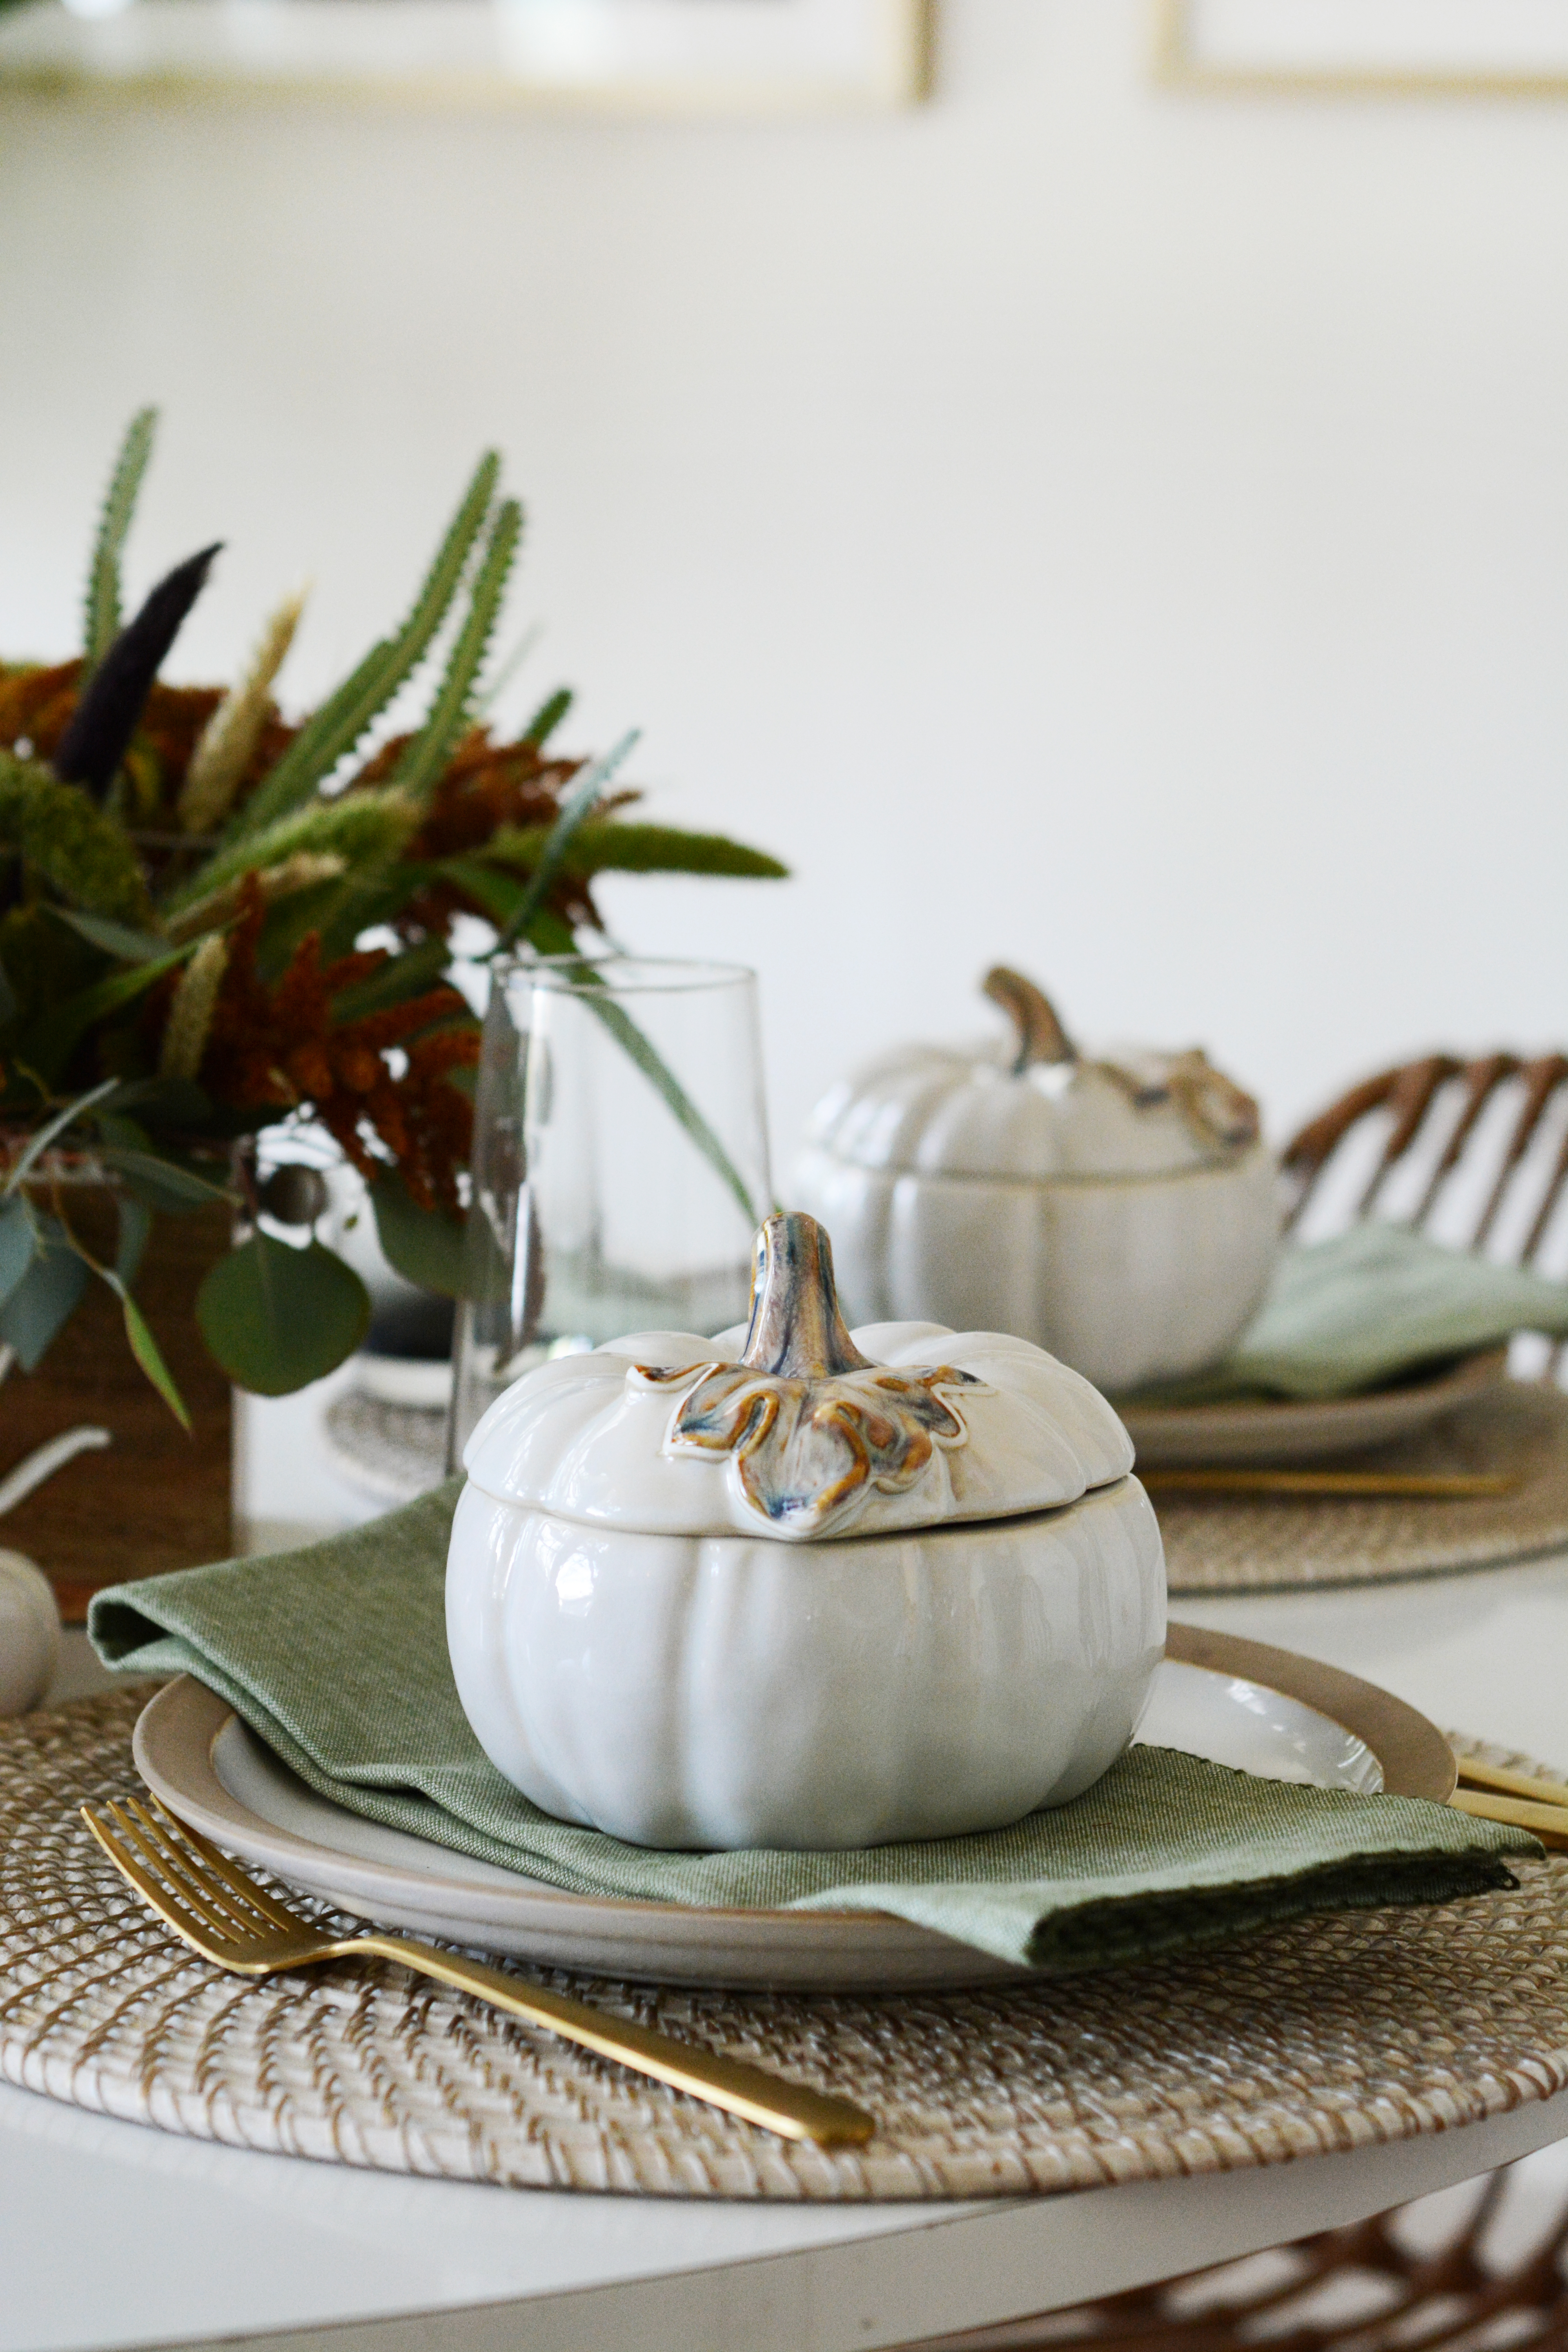 Host a relaxed Friendsgiving luncheon with Roasted Butternut Squash Turkey Wild Rice Soup + Pumpkin Spice Cornbread Muffins.